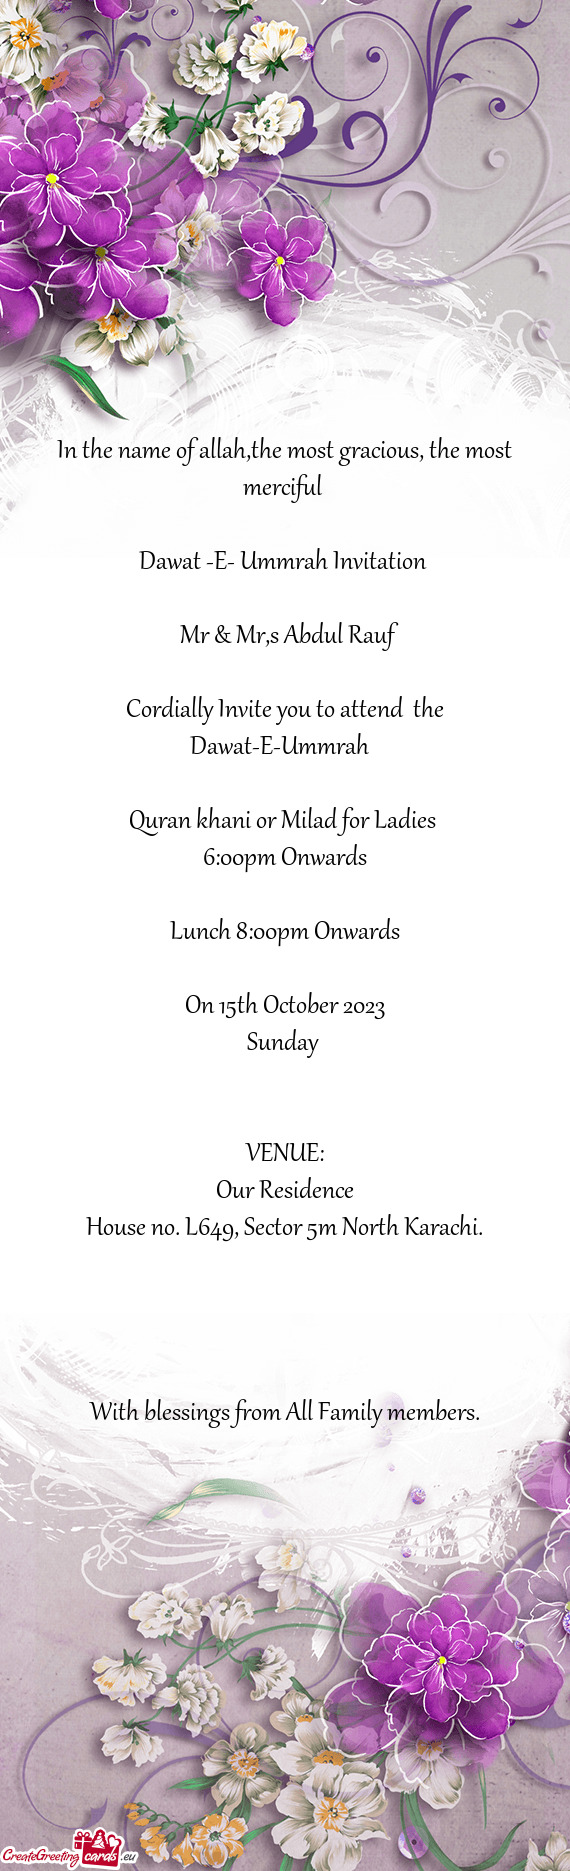 Cordially Invite you to attend the Dawat-E-Ummrah